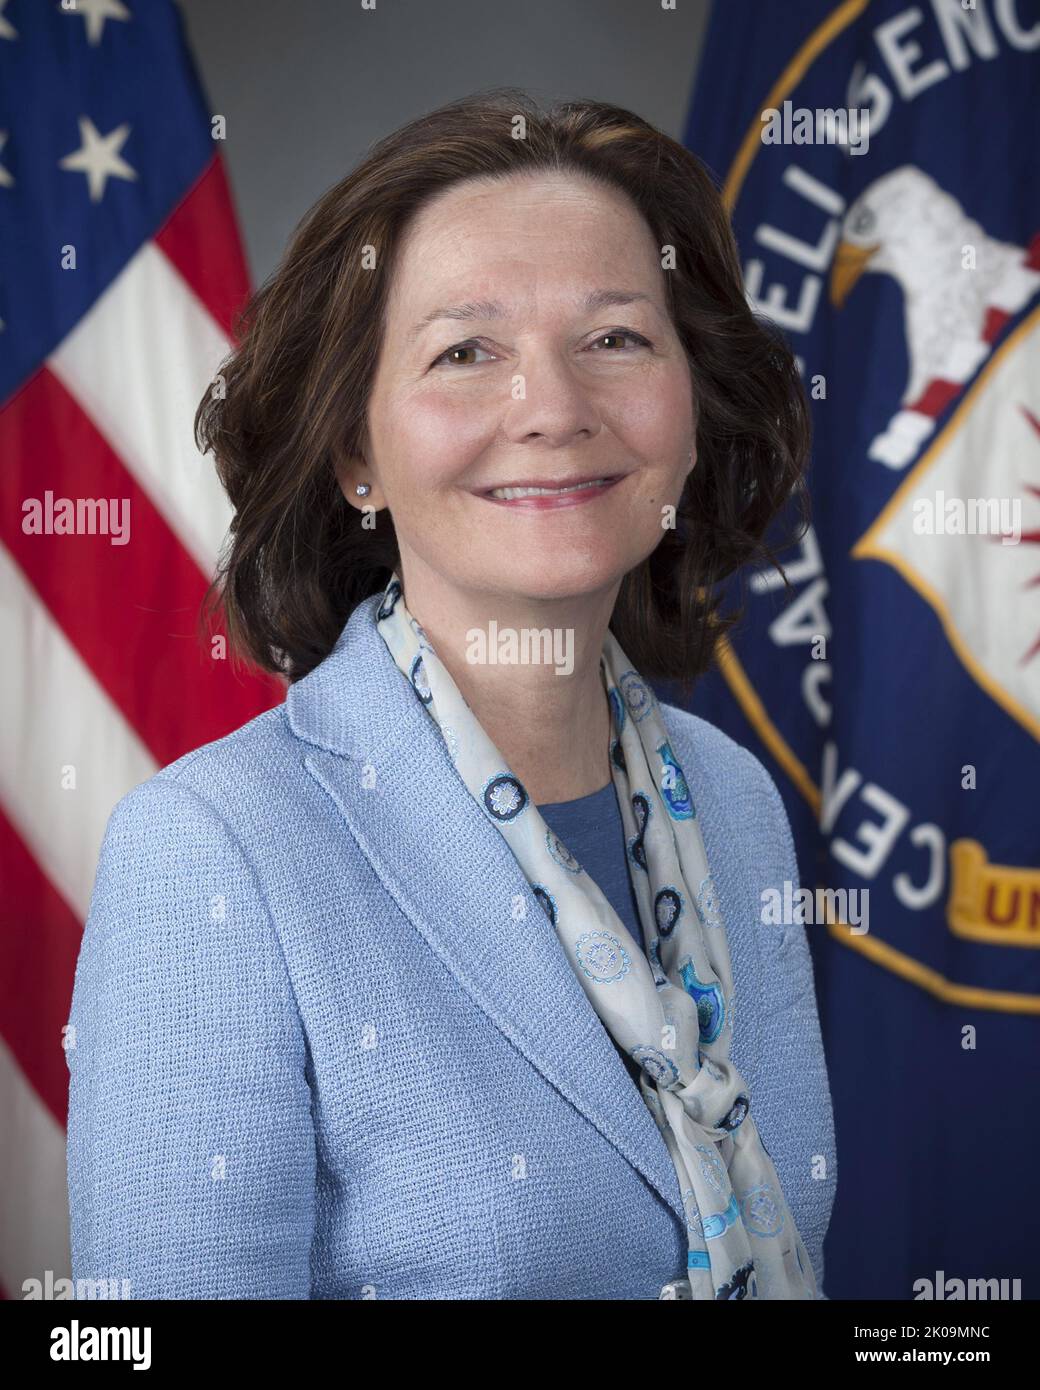 Gina Cheri Walker Haspel (born October 1, 1956) American intelligence officer who served as director of the Central Intelligence Agency (CIA) from 2018 to 2021. She was the first woman to hold the post on a permanent basis and was previously the deputy director under Mike Pompeo during the early days of Donald Trump's presidency. Stock Photo